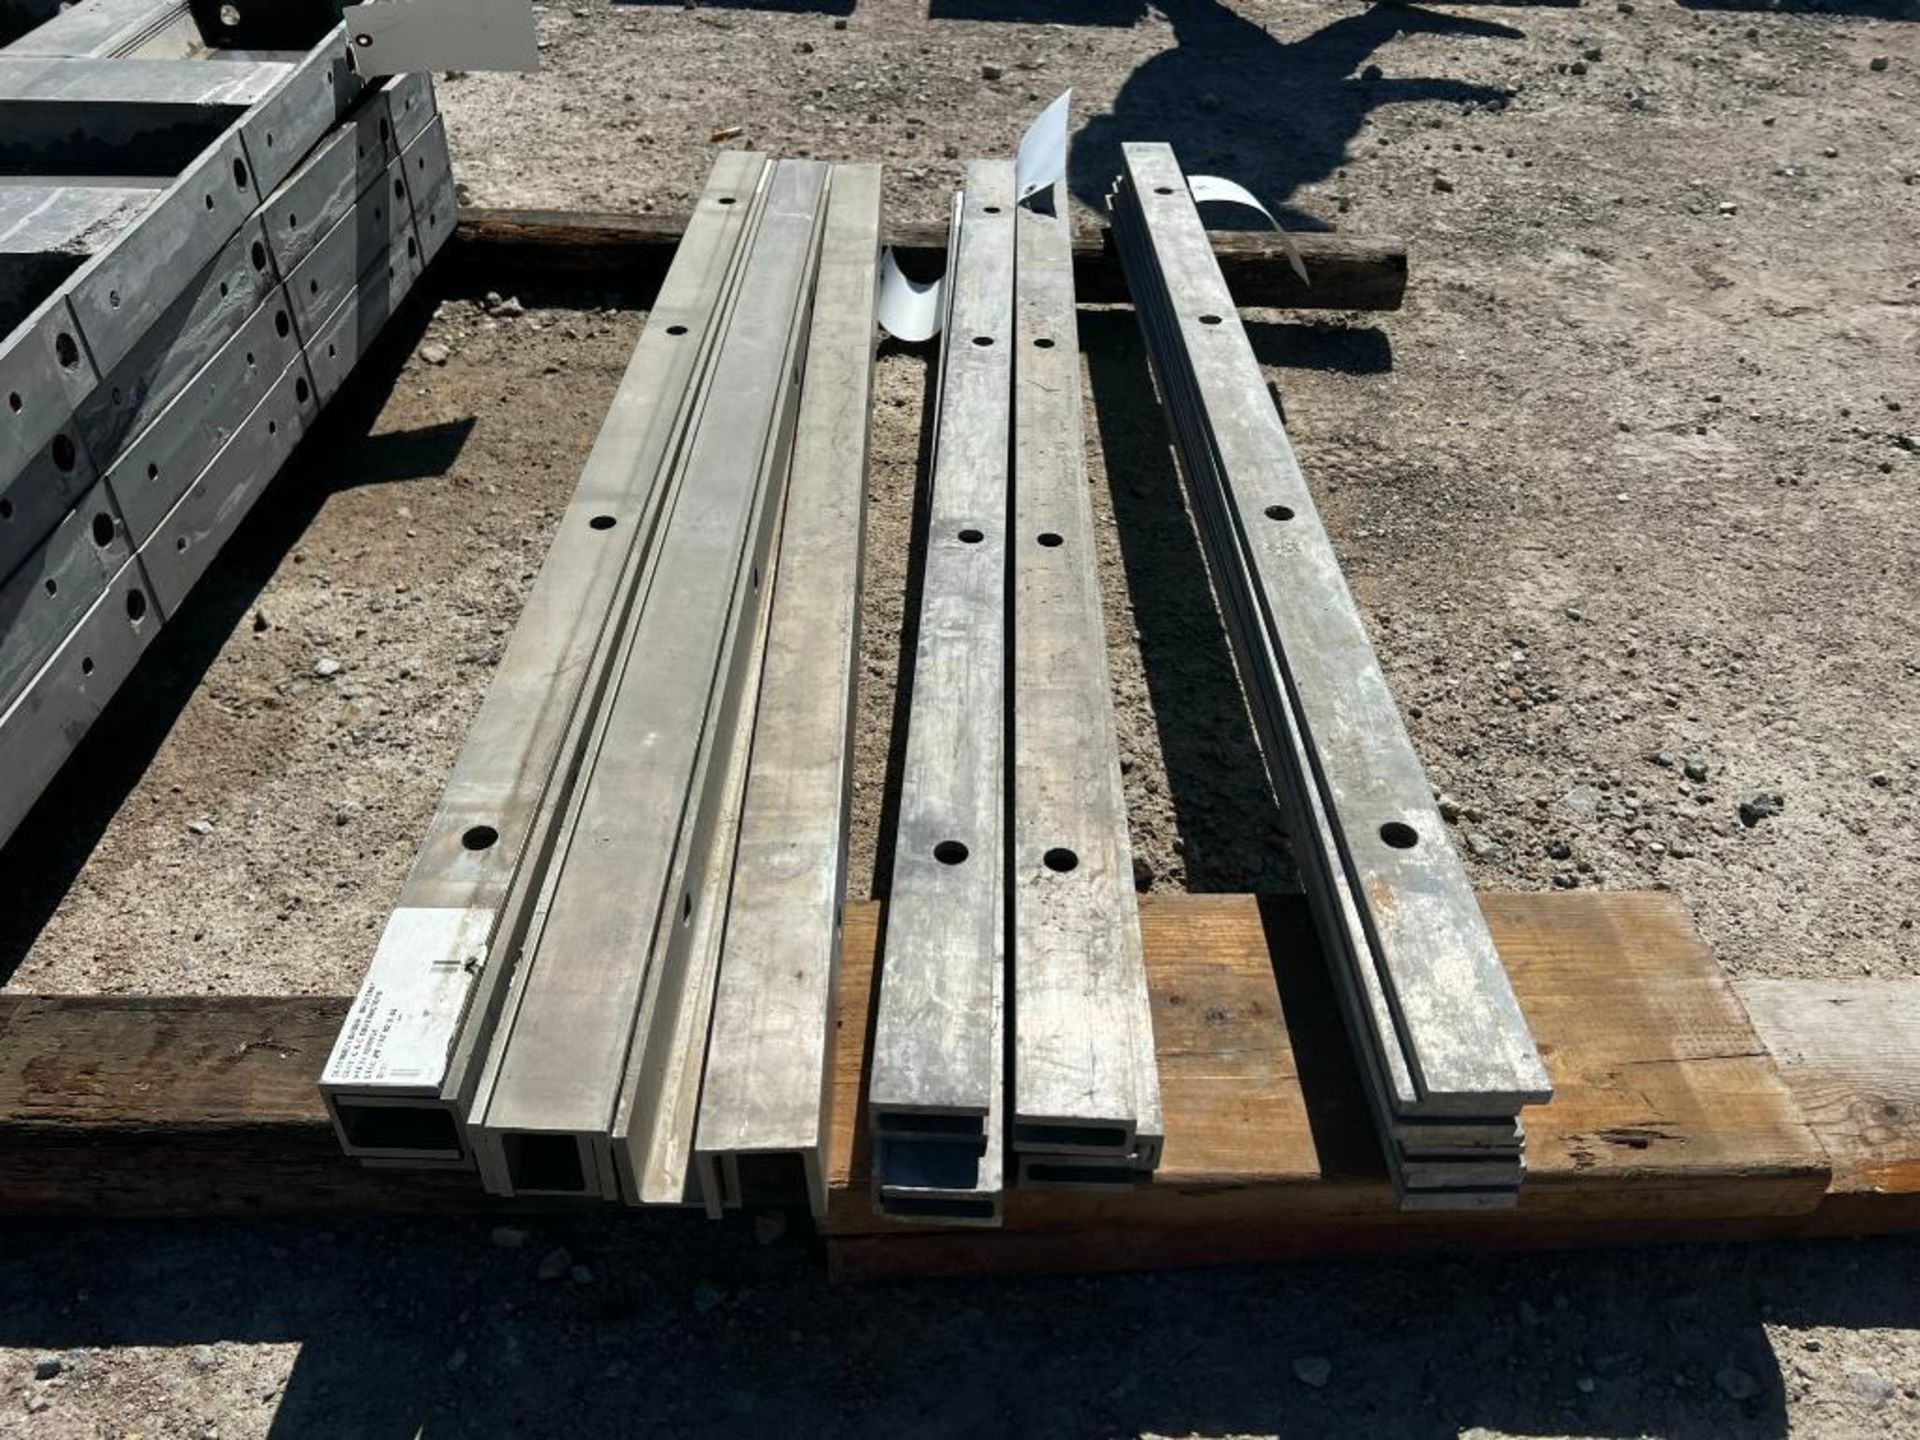 (6) 2" (6) 1" (9) .5" x 4' Western Smooth Aluminum Concrete Forms